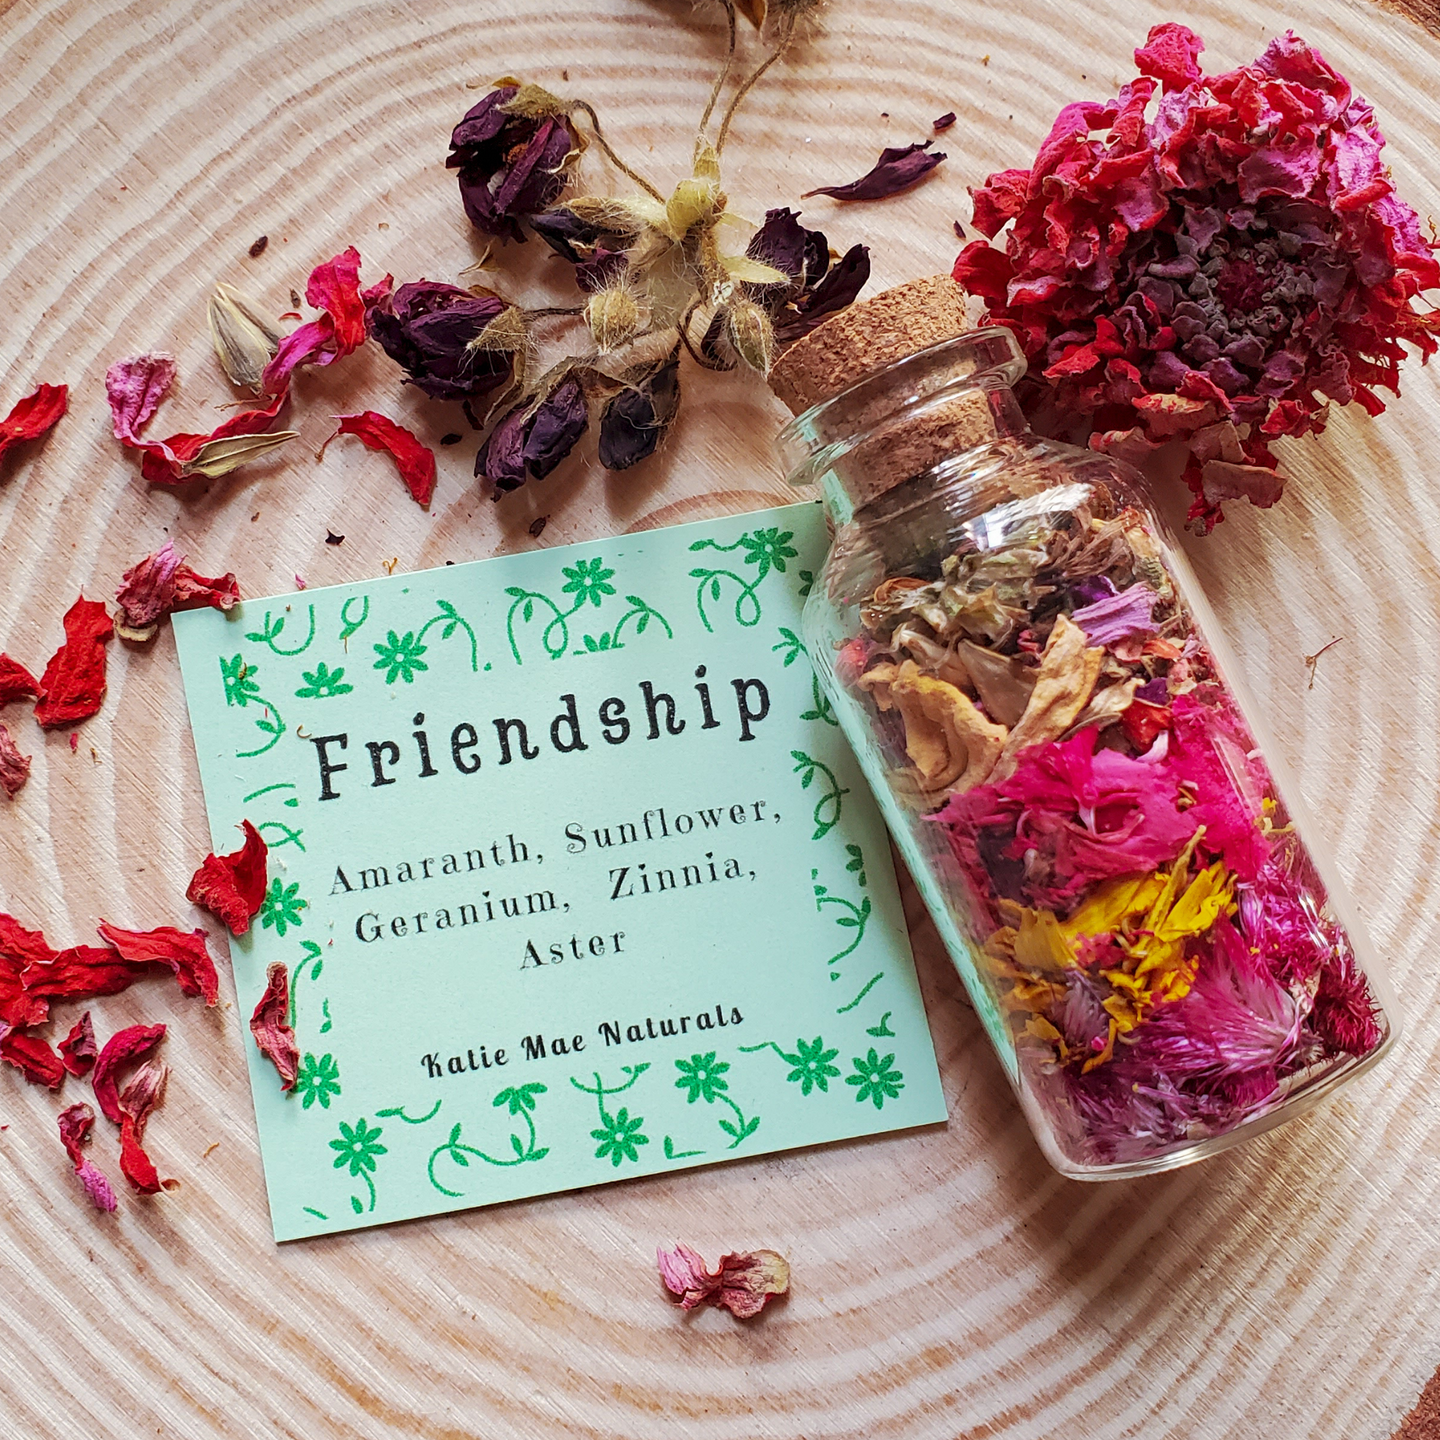 Friendship bottle, dried herbs and flowers with symbolism of friendship